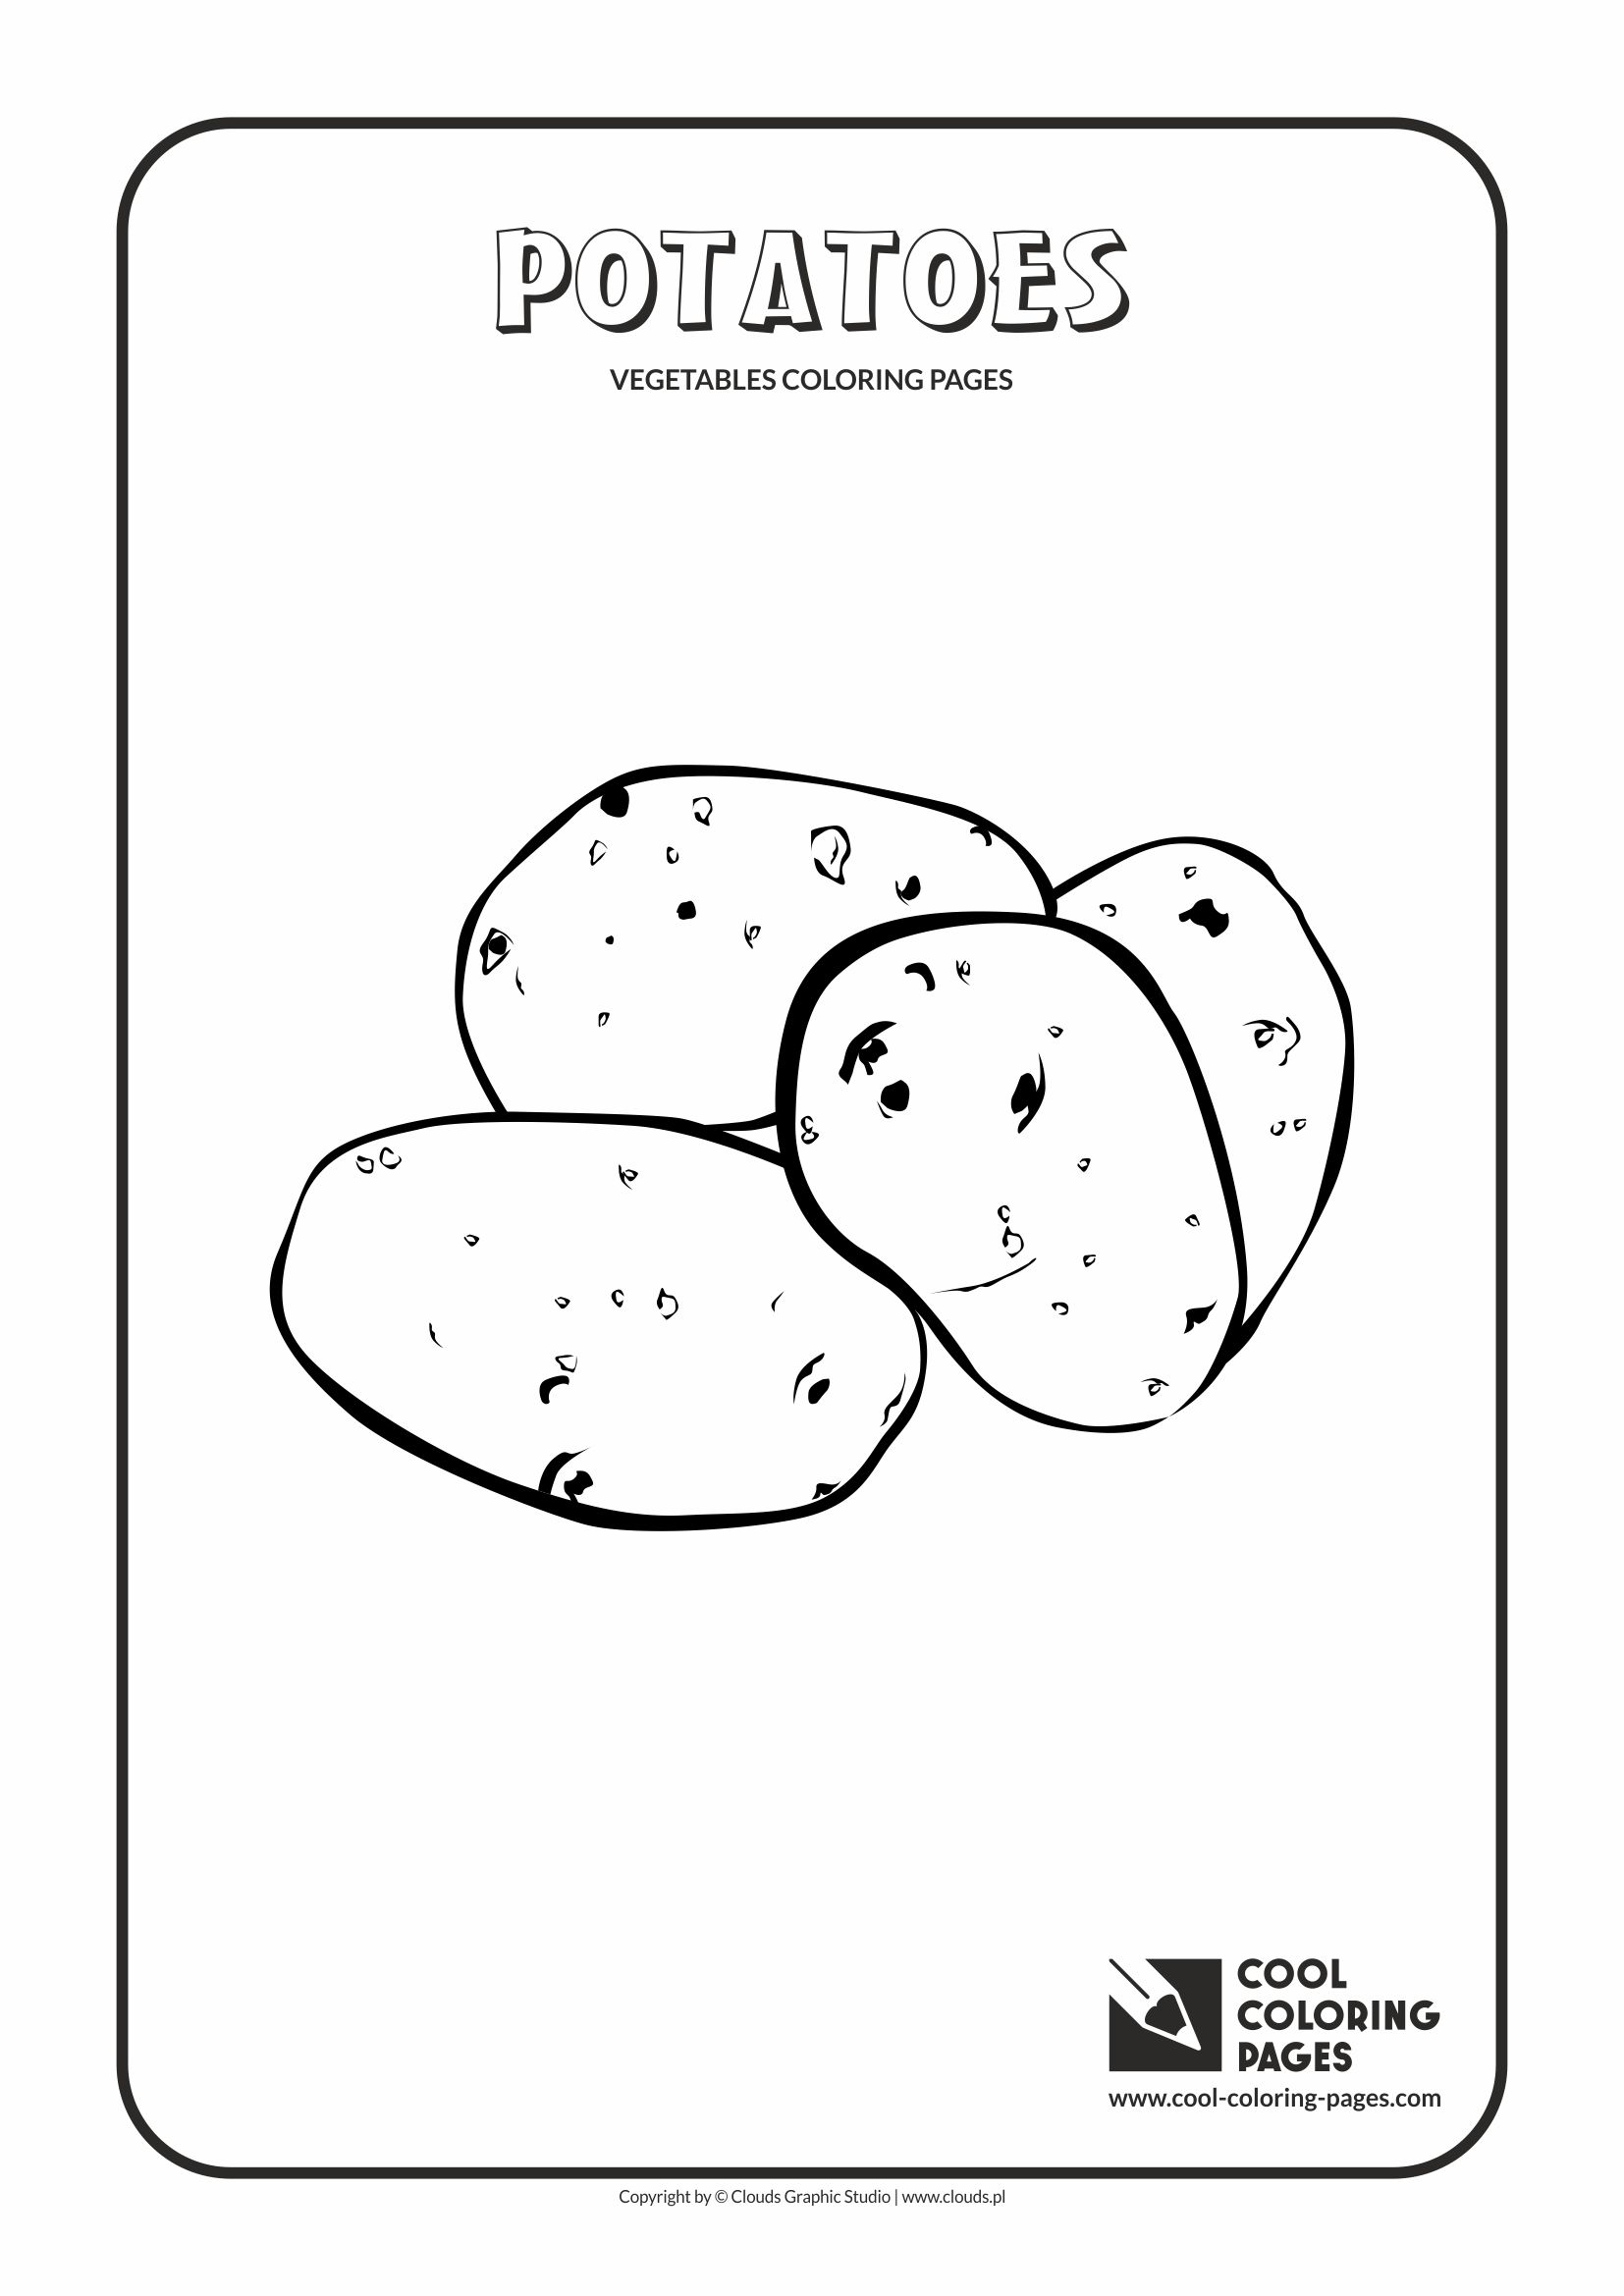 Cool Coloring Pages - Plants / Potatoes / Coloring page with potatoes